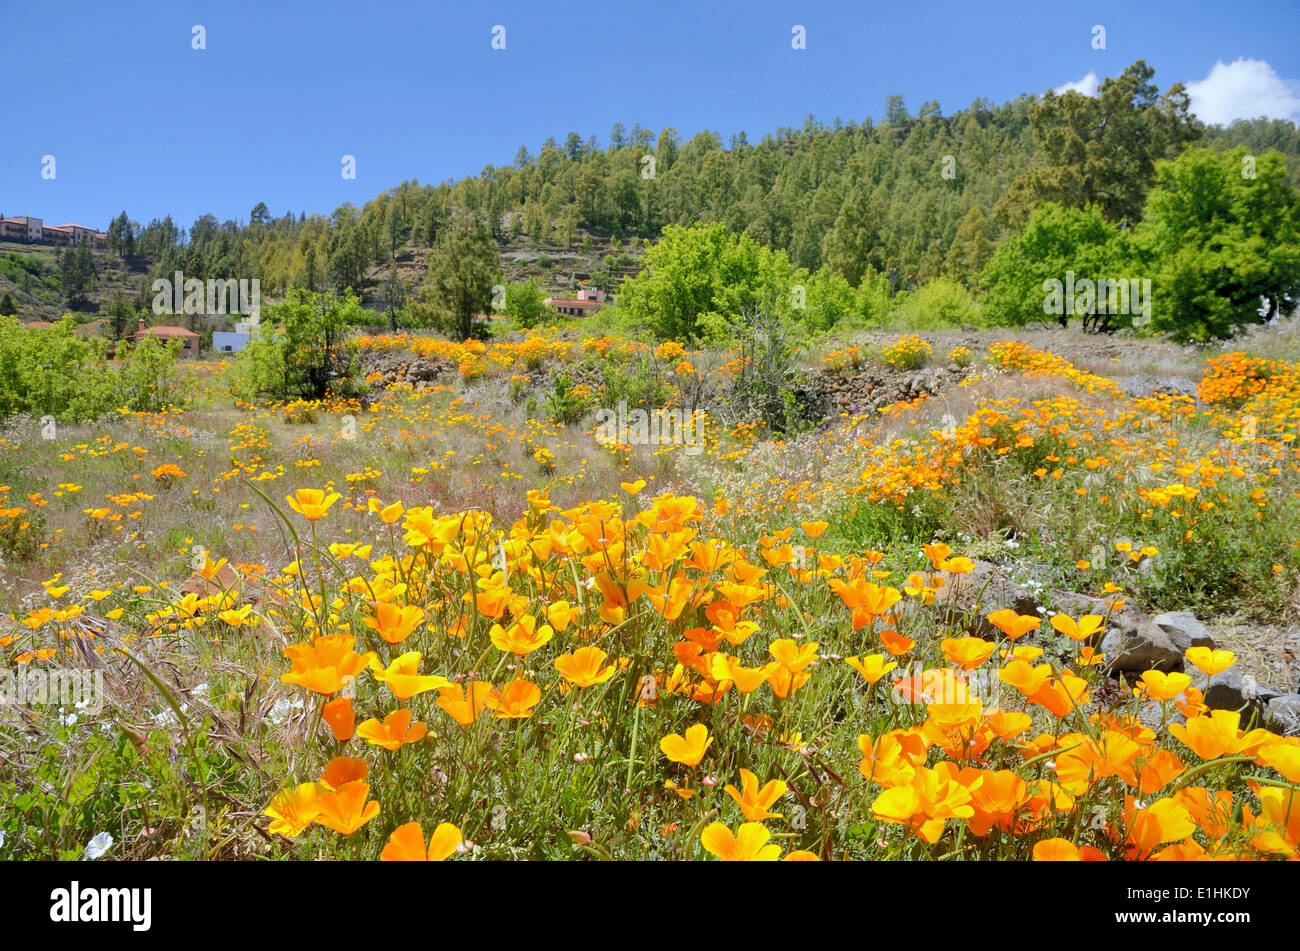 California Poppies or Golden Poppies (Eschscholtzia california) on a uncultivated land in the flower town of Vilaflor, Tenerife Stock Photo